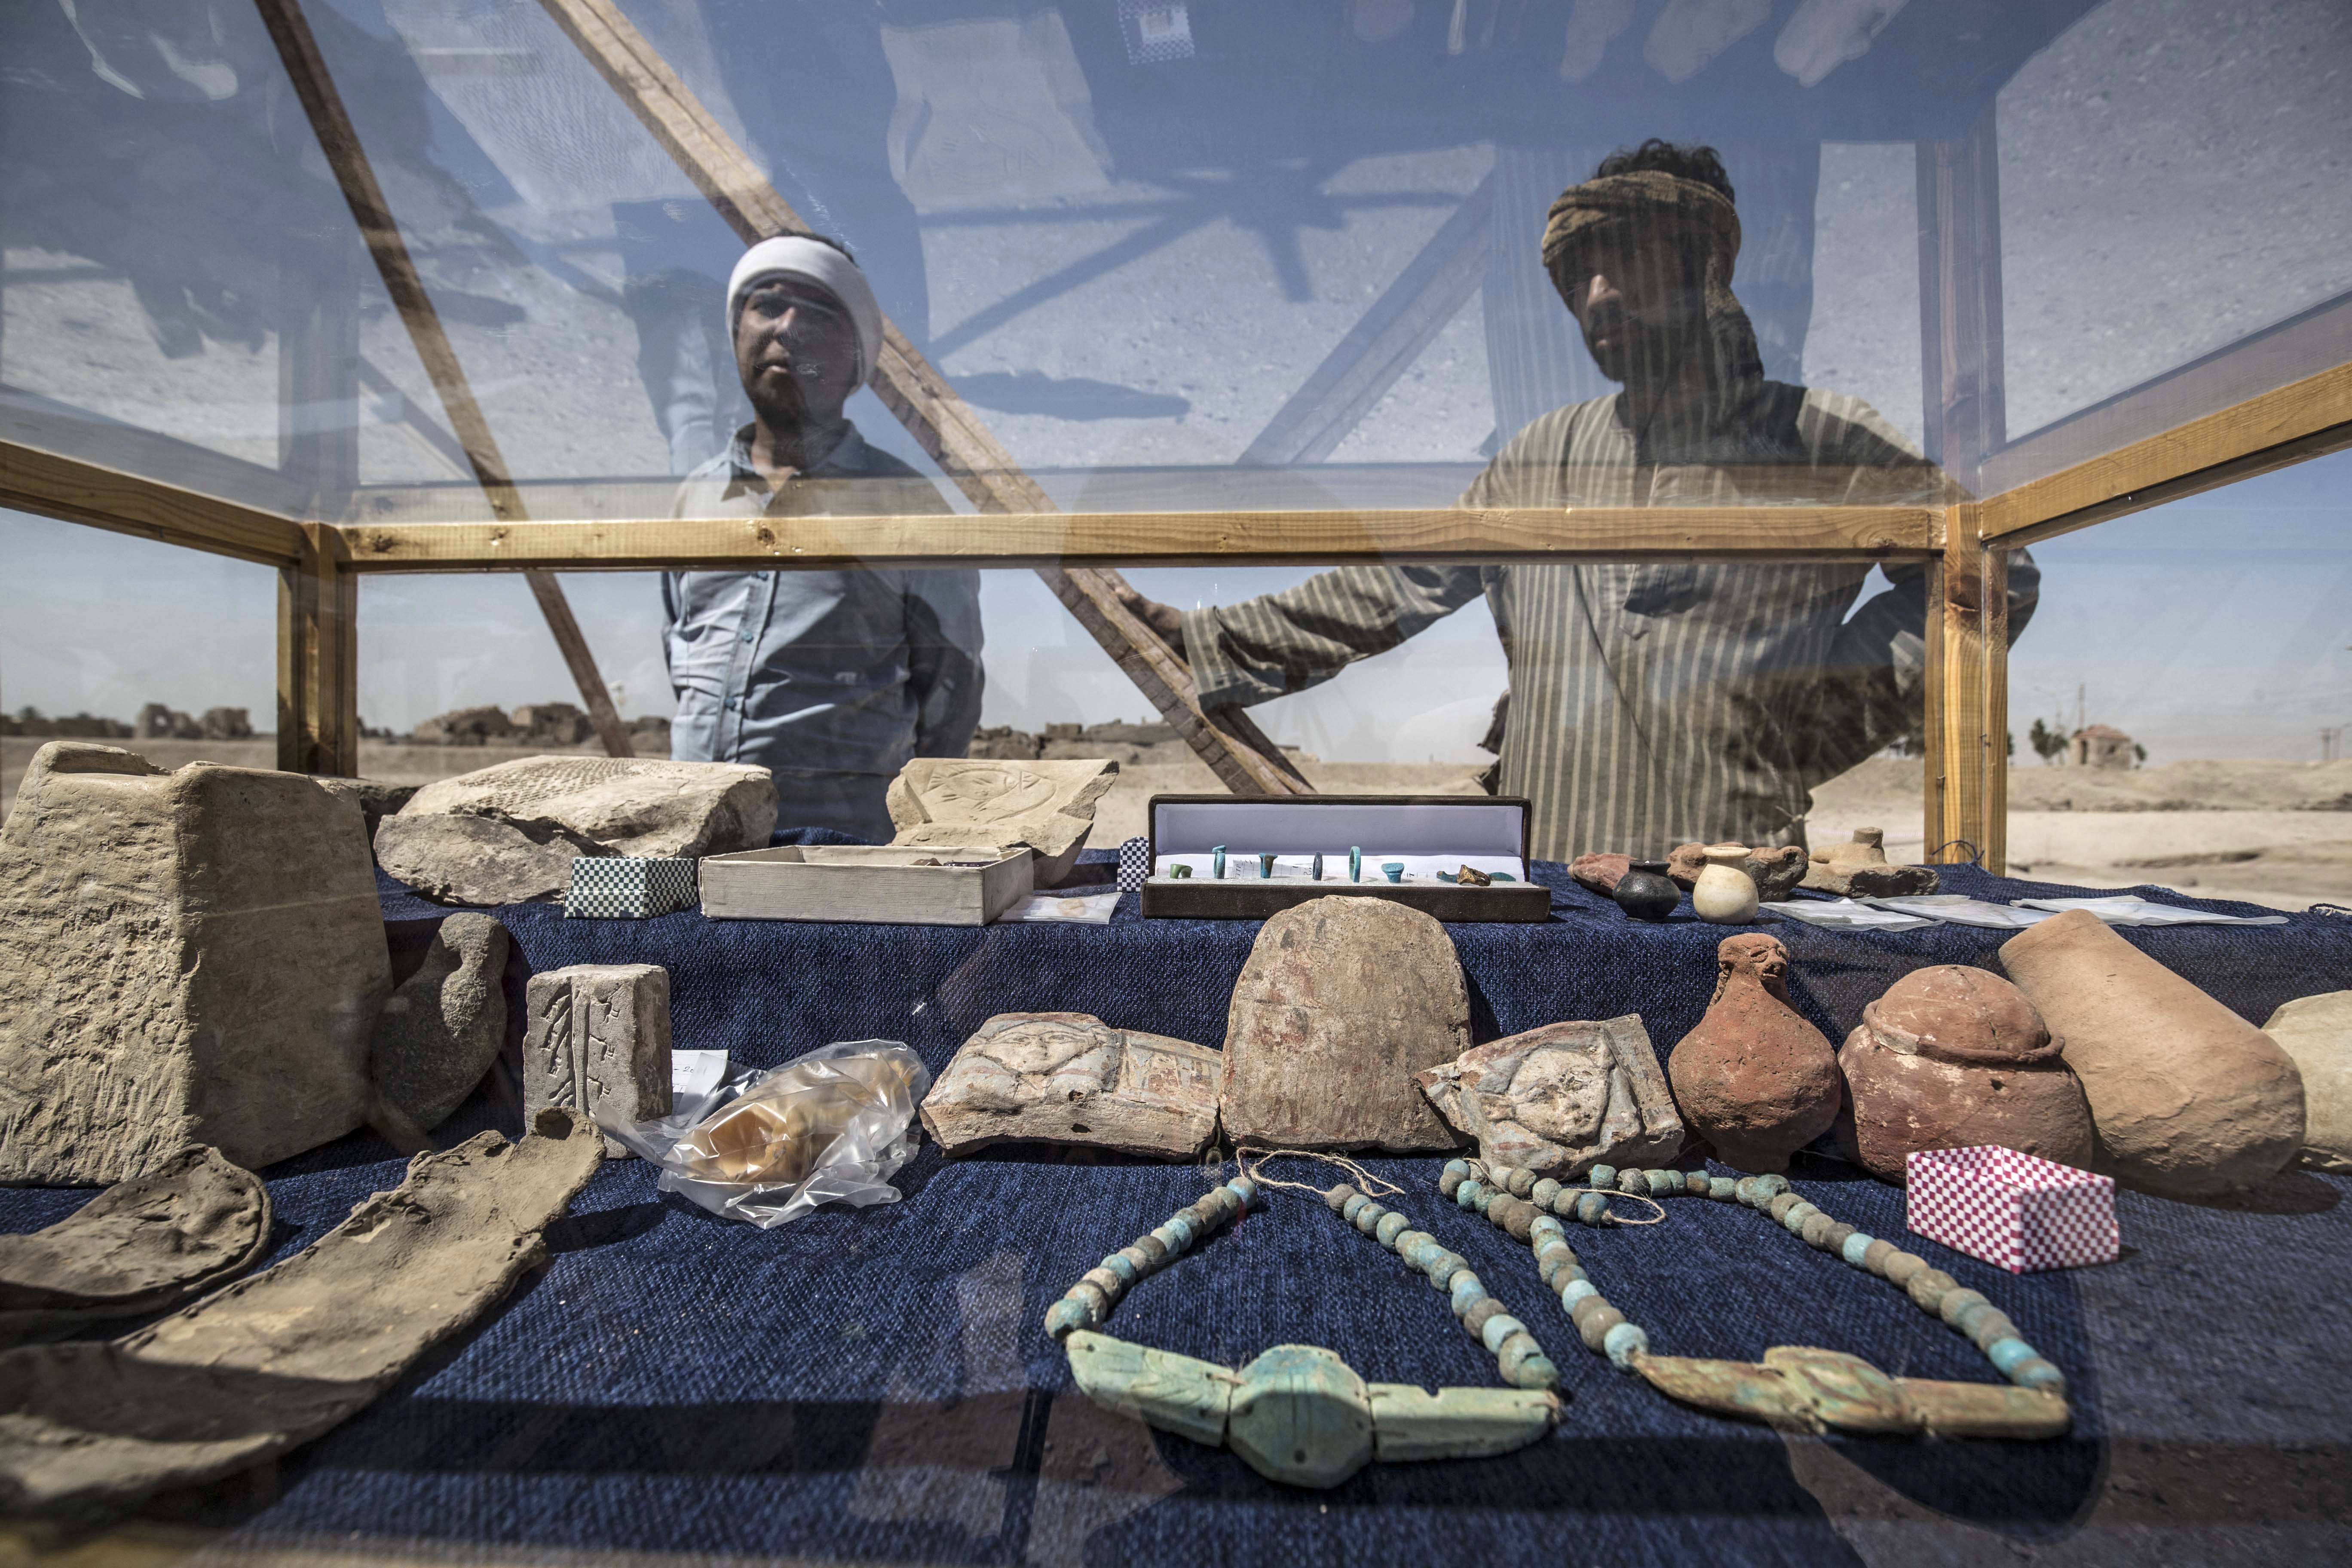 Workers standing next to a display of artifacts uncovered at the archaeological site of a 3000 year old city